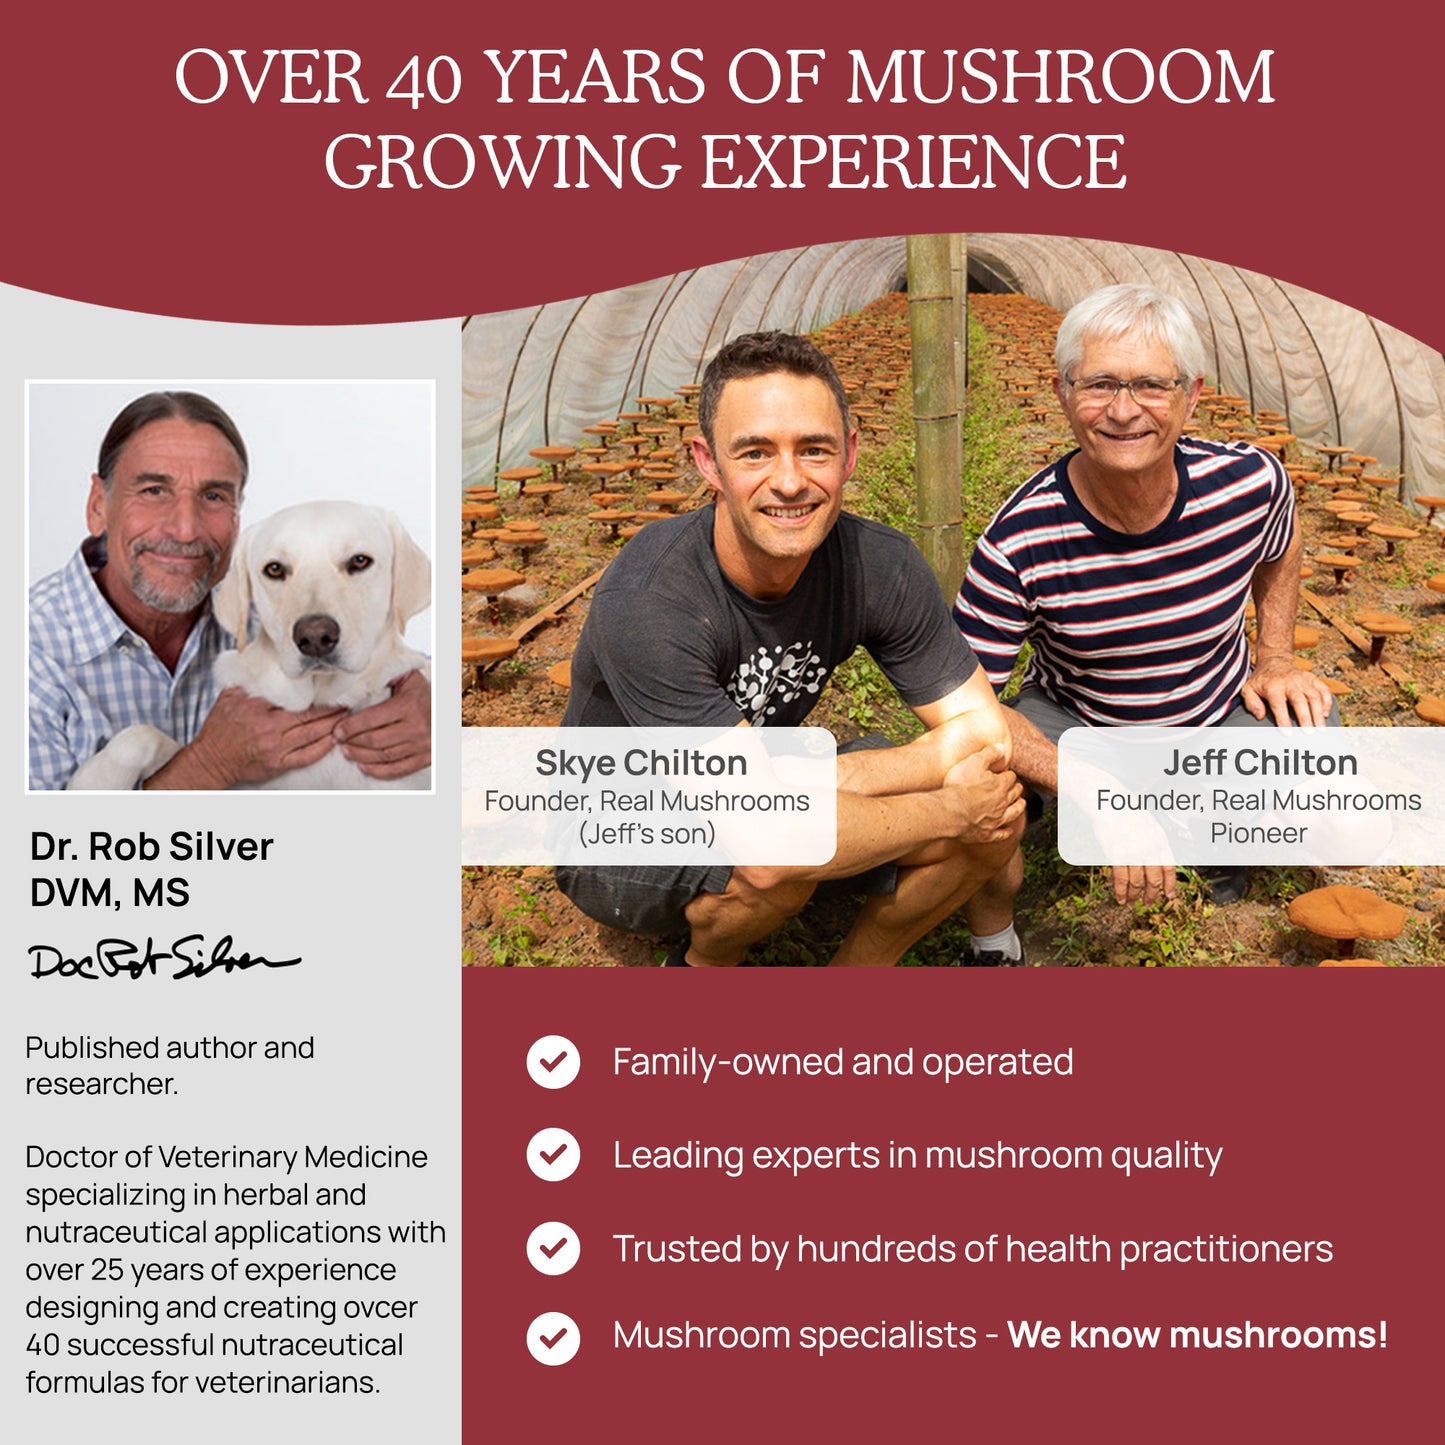 Three individuals representing Real Mushrooms, a family-owned mushroom growing business, showcasing their expertise and commitment to the industry with over 40 years of experience, featuring founders and a specialist with a background in veterinary medicine and herbal compounds.